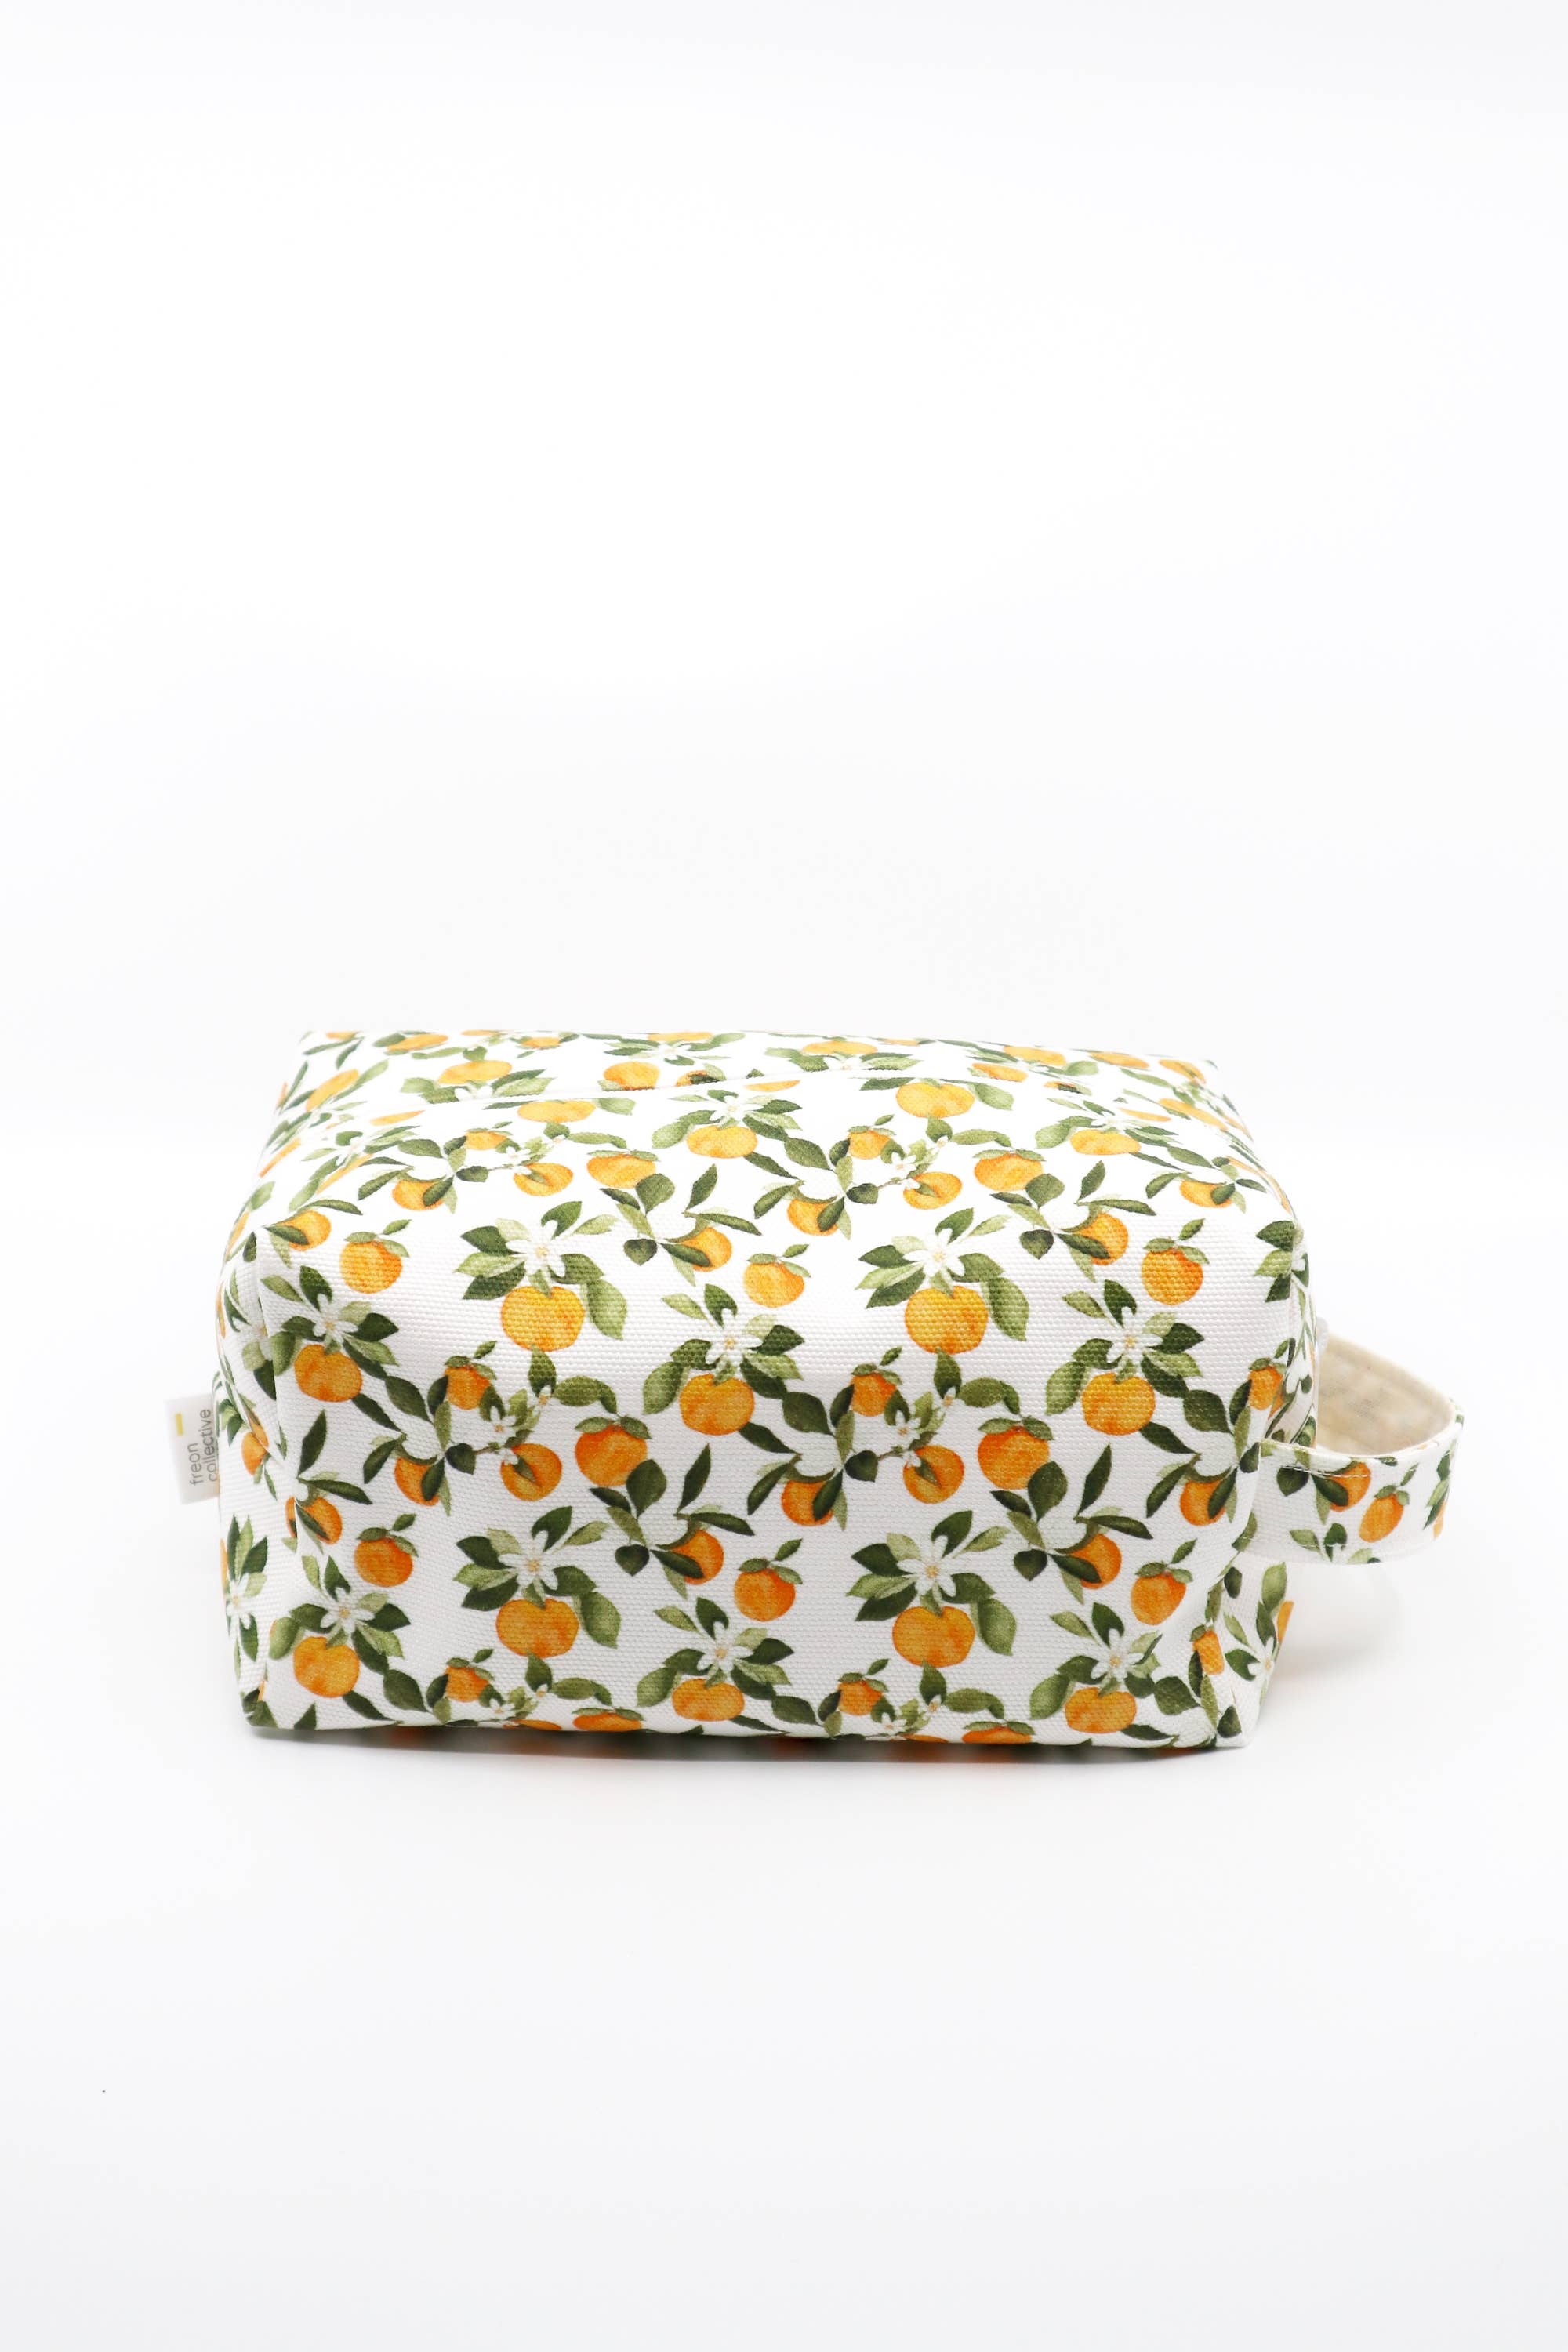 Freon Collective - Makeup Bag - Clementine